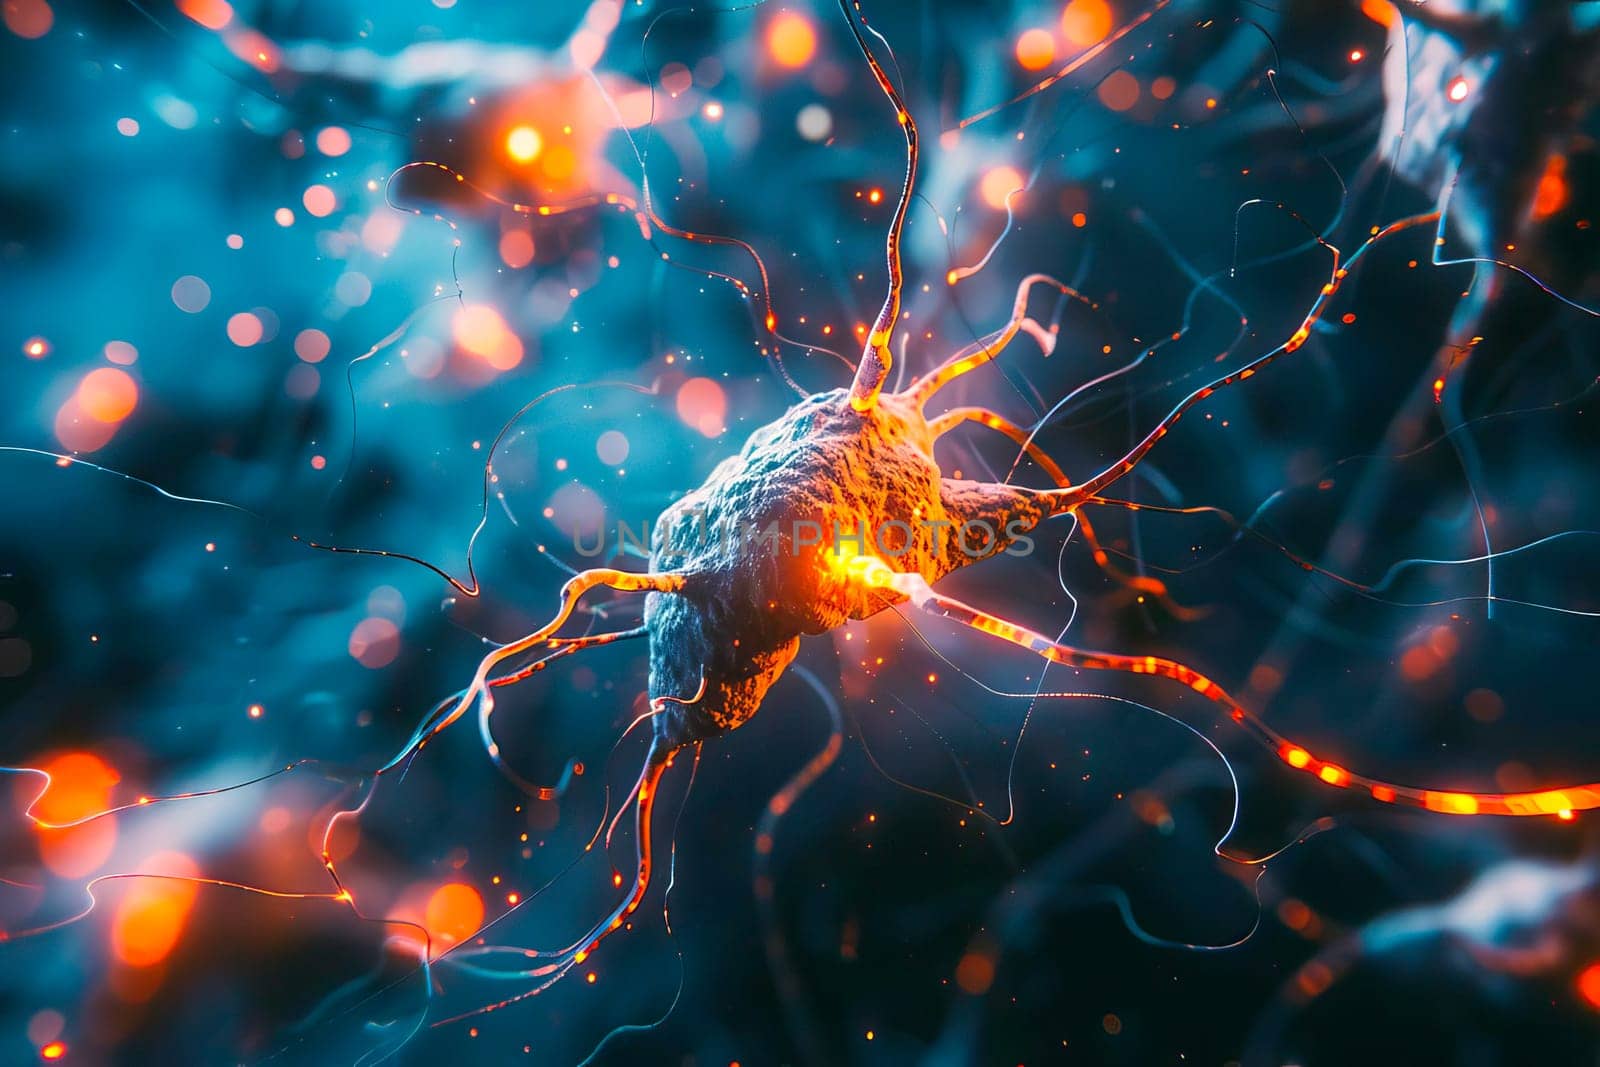 Detailed visualization of neurons firing in the human brain, showing intricate neural connections and activity.